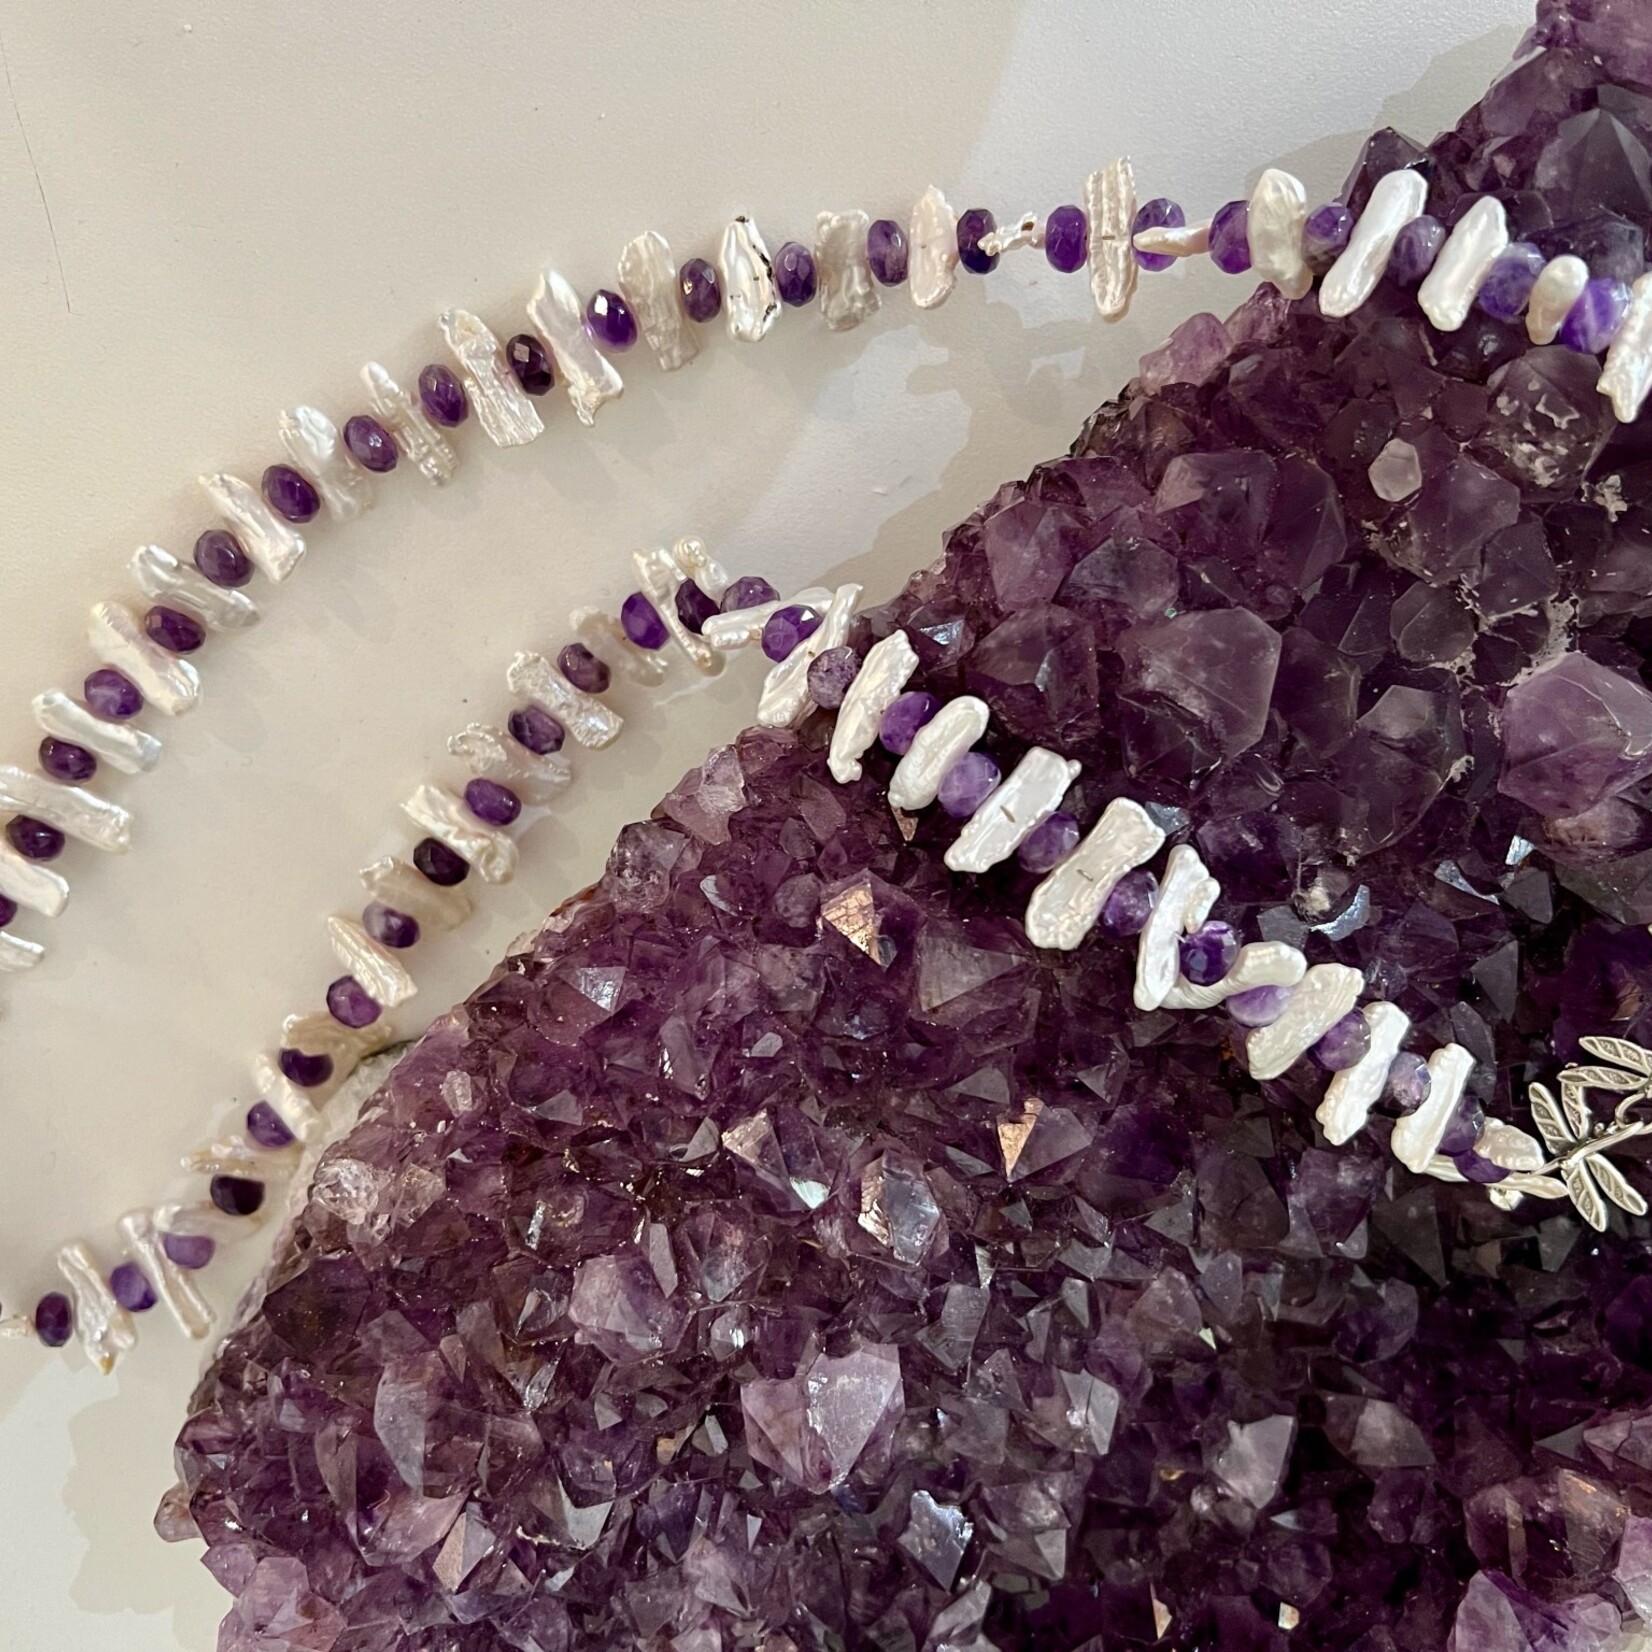 Rare Finds Necklace,White Biwa Fresh Water Pearls w/faceted amethyst rondelle spacers, 26", RARE